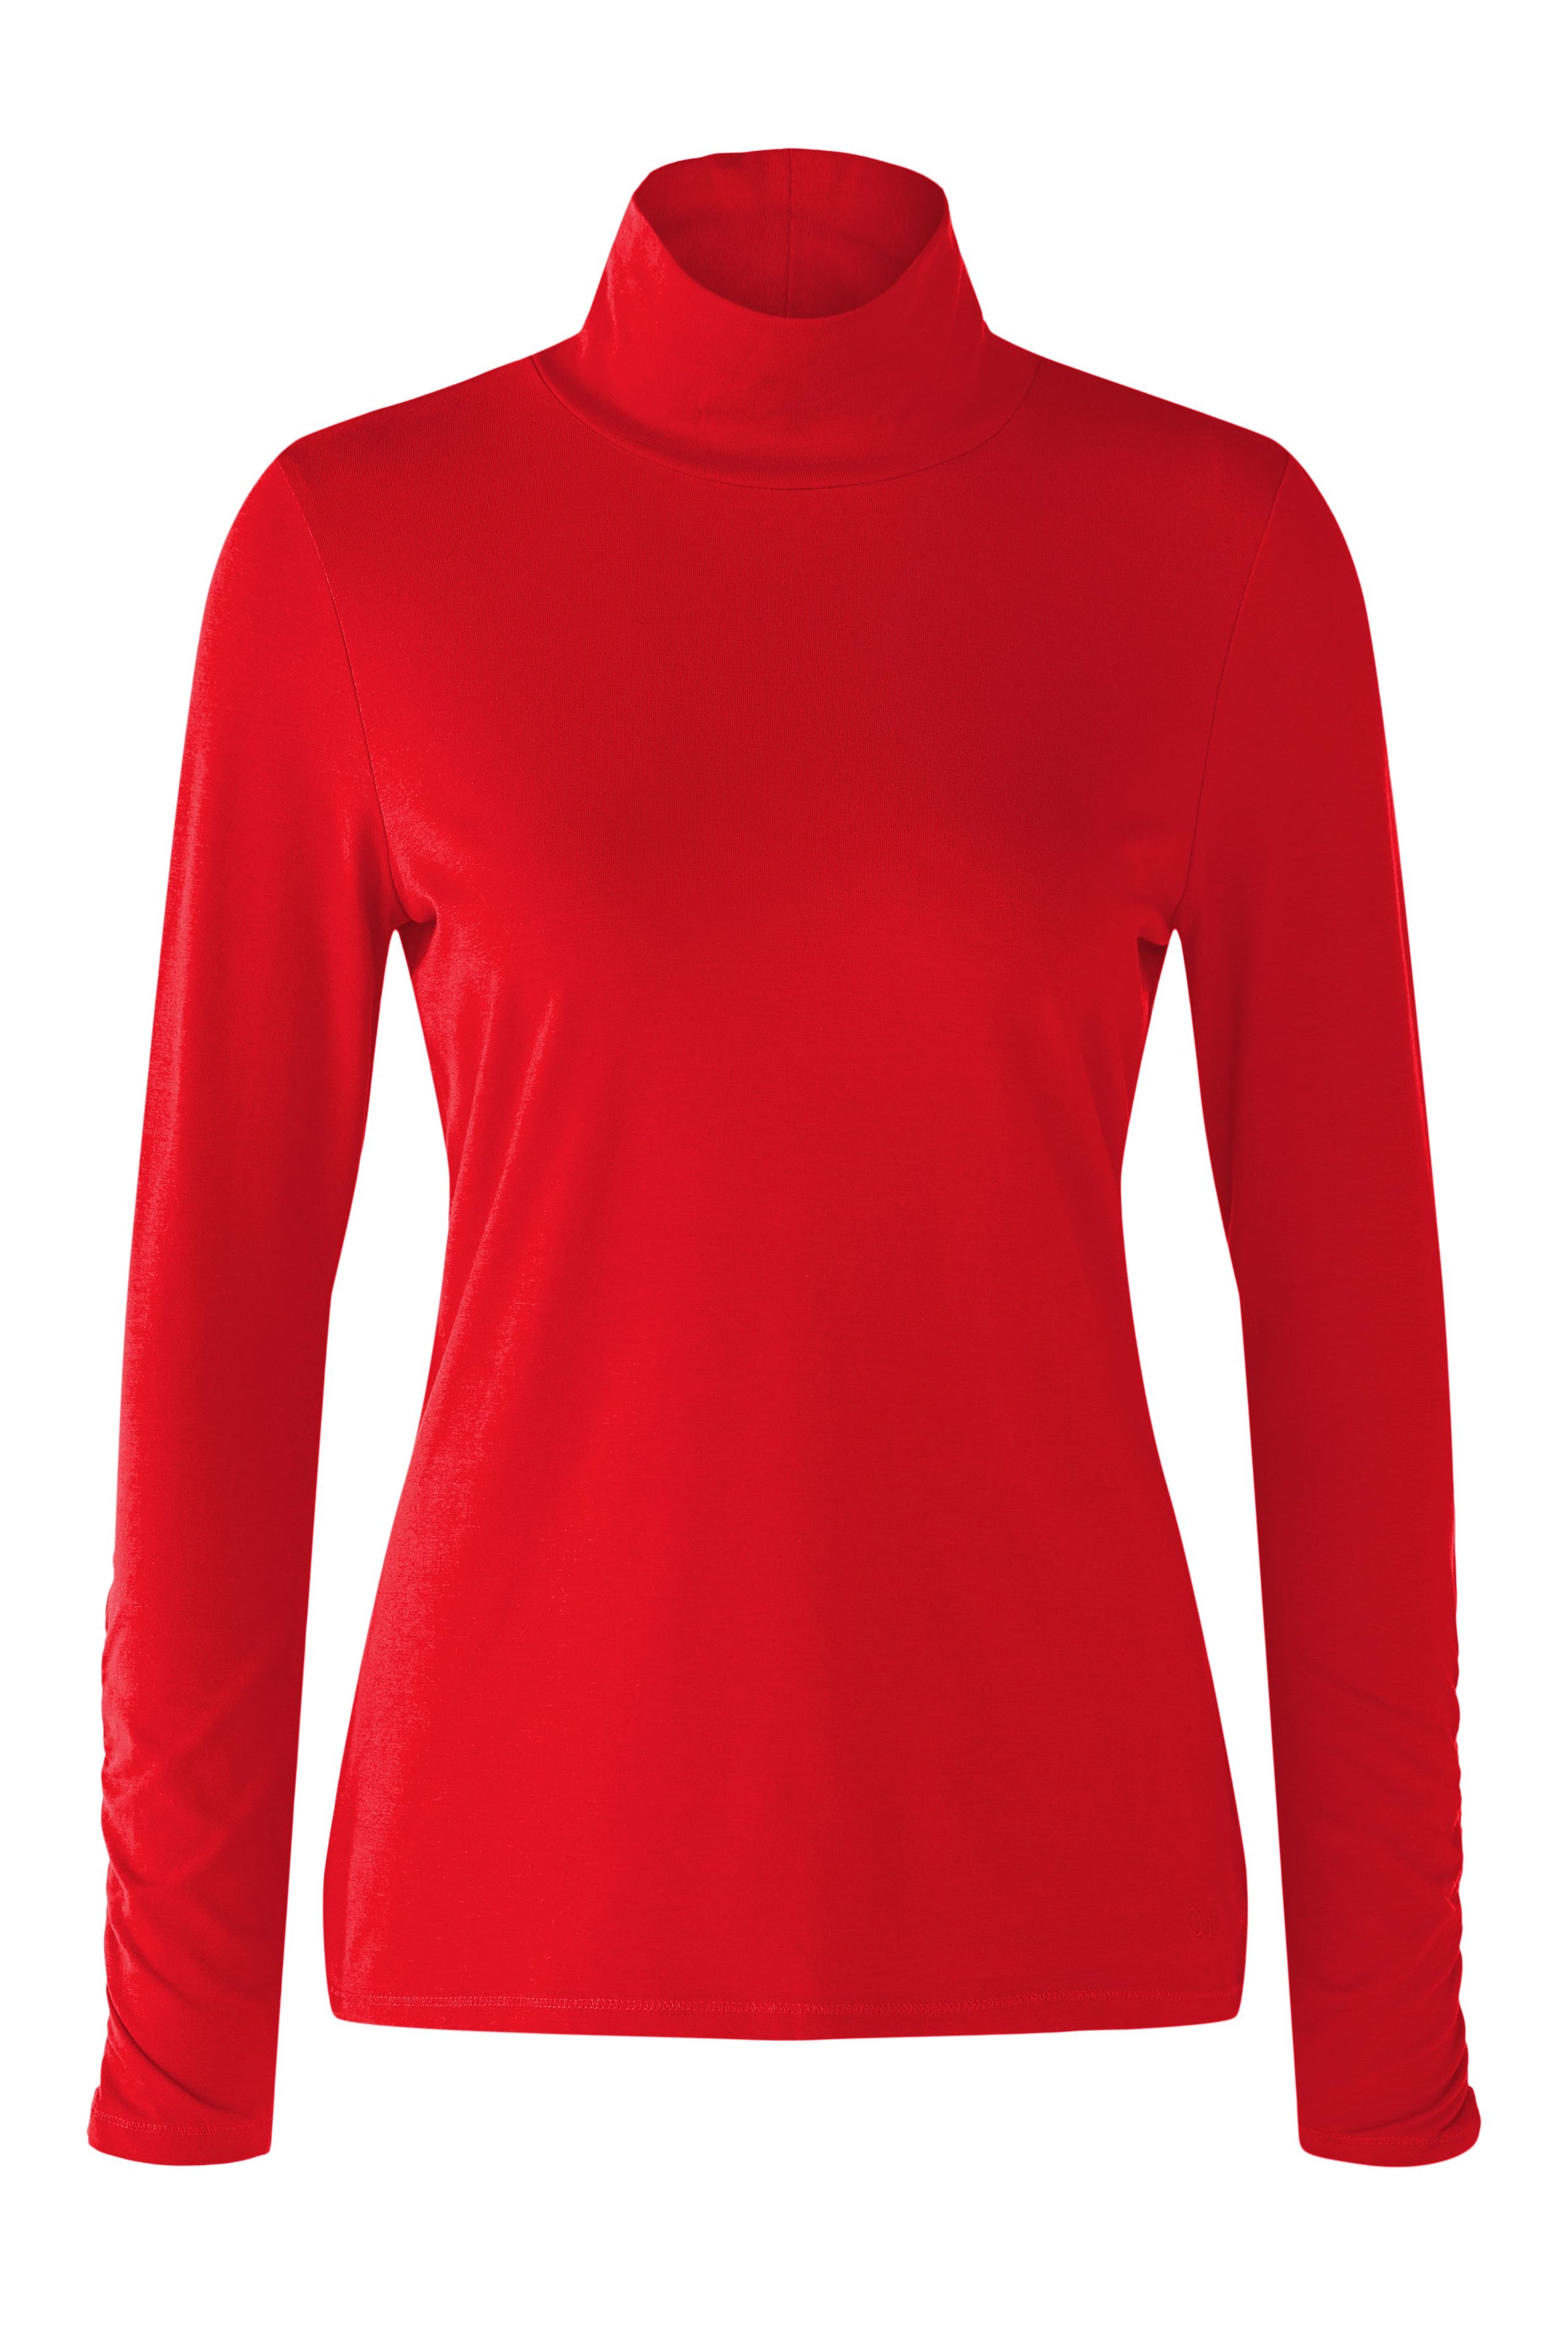 Oui Turtleneck Stand-Up Collar Shirt Red